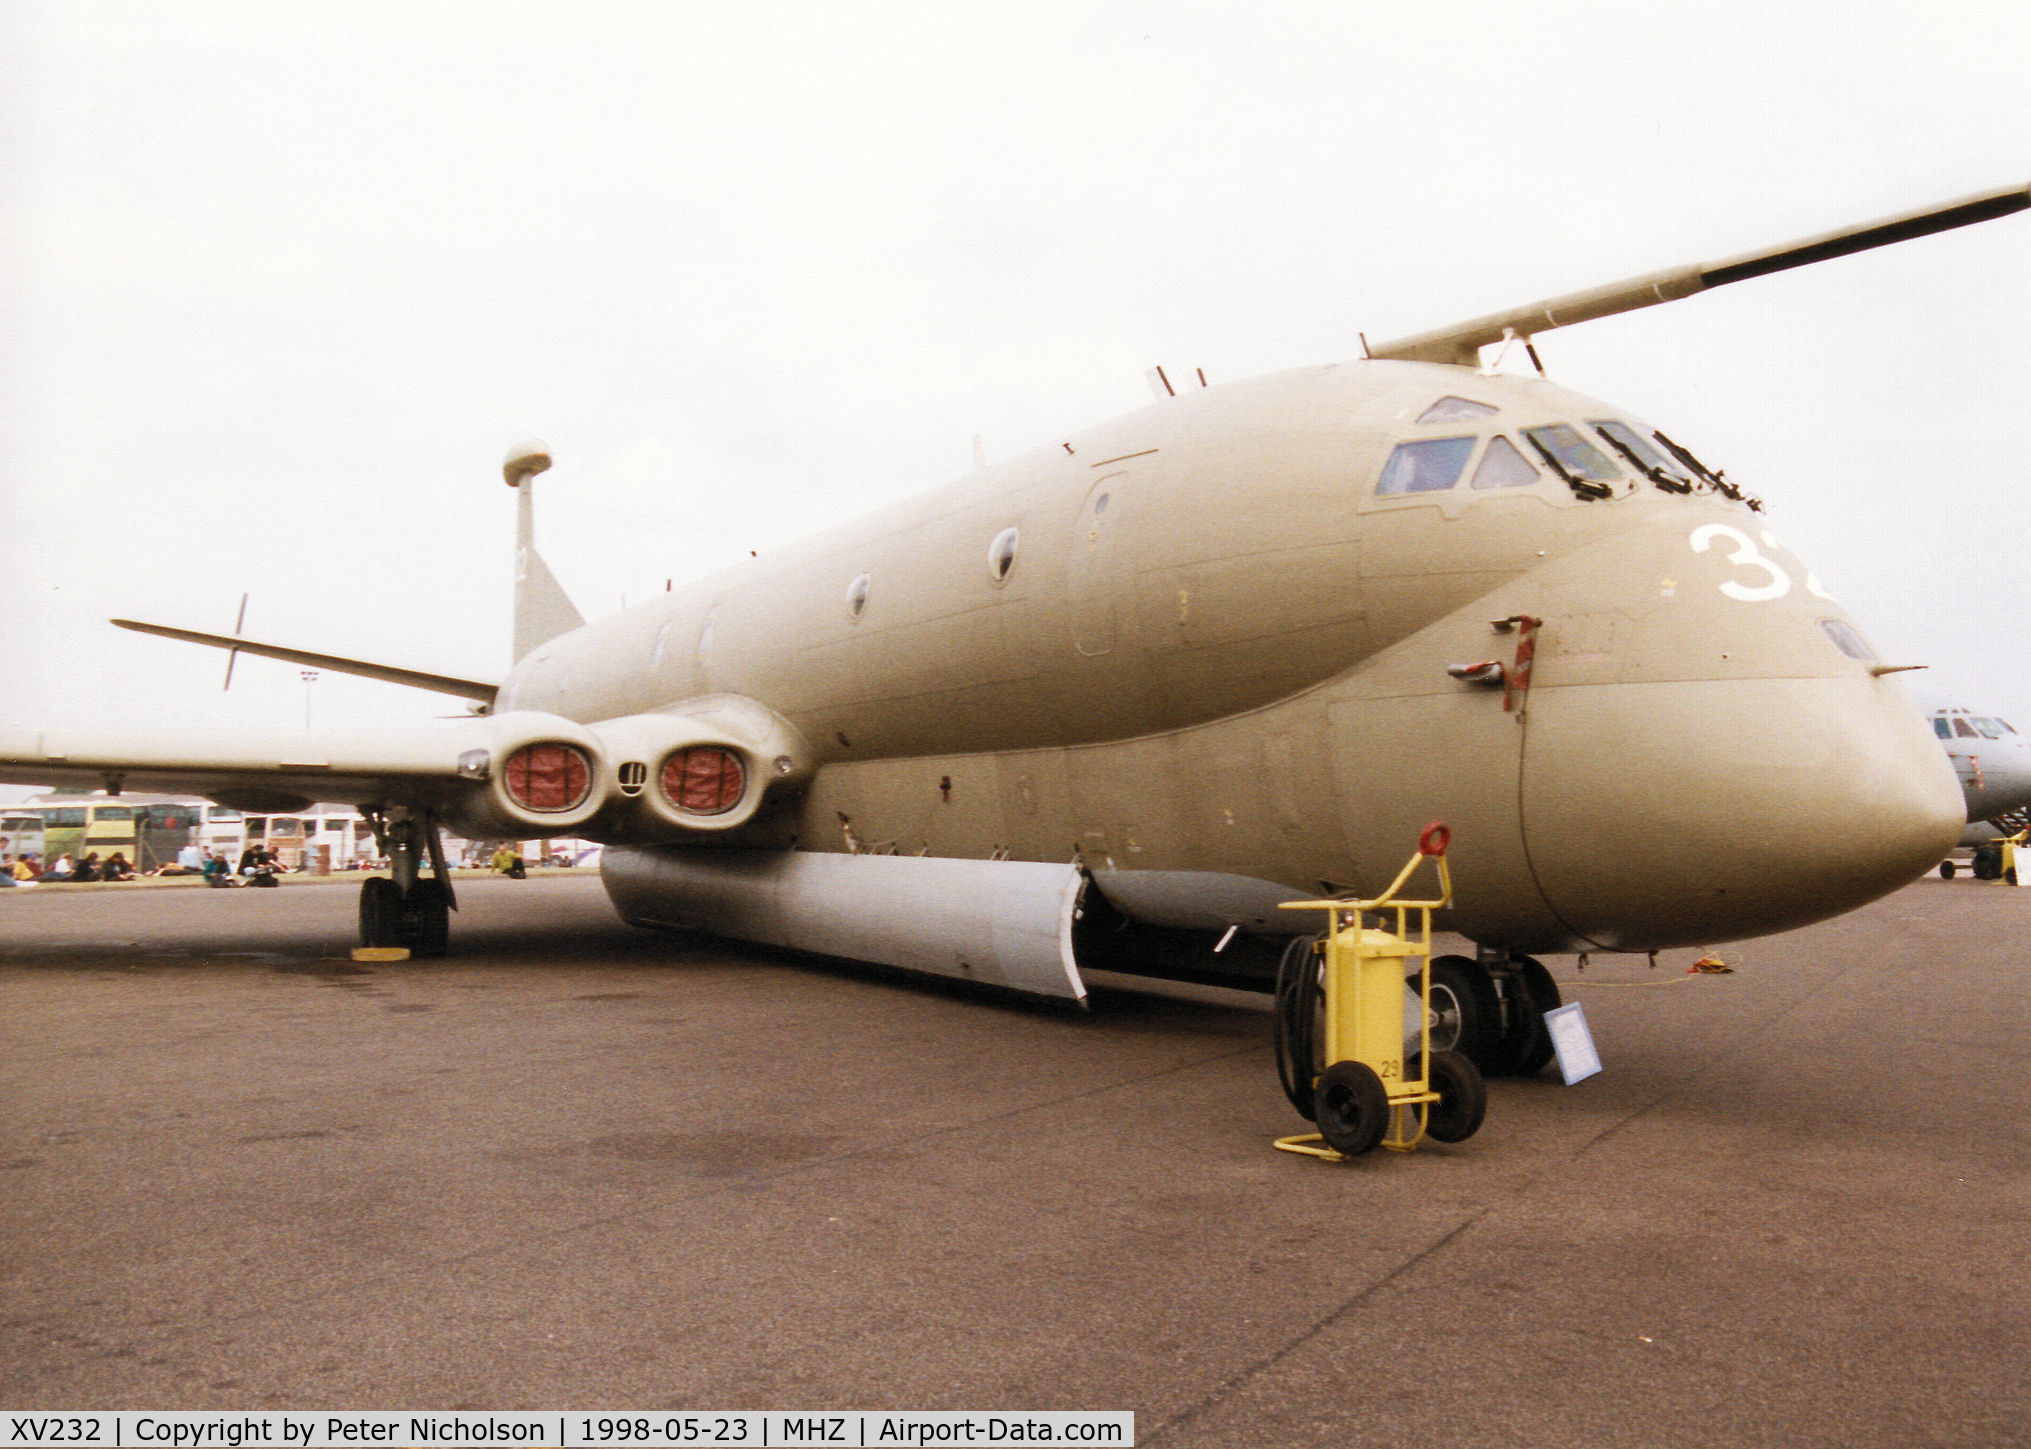 XV232, Hawker Siddeley Nimrod MR.2 C/N 8007, Nimrod MR.2 of 206 Squadron of the Kinloss Wing on display at the 1998 RAF Mildenhall Air Fete.